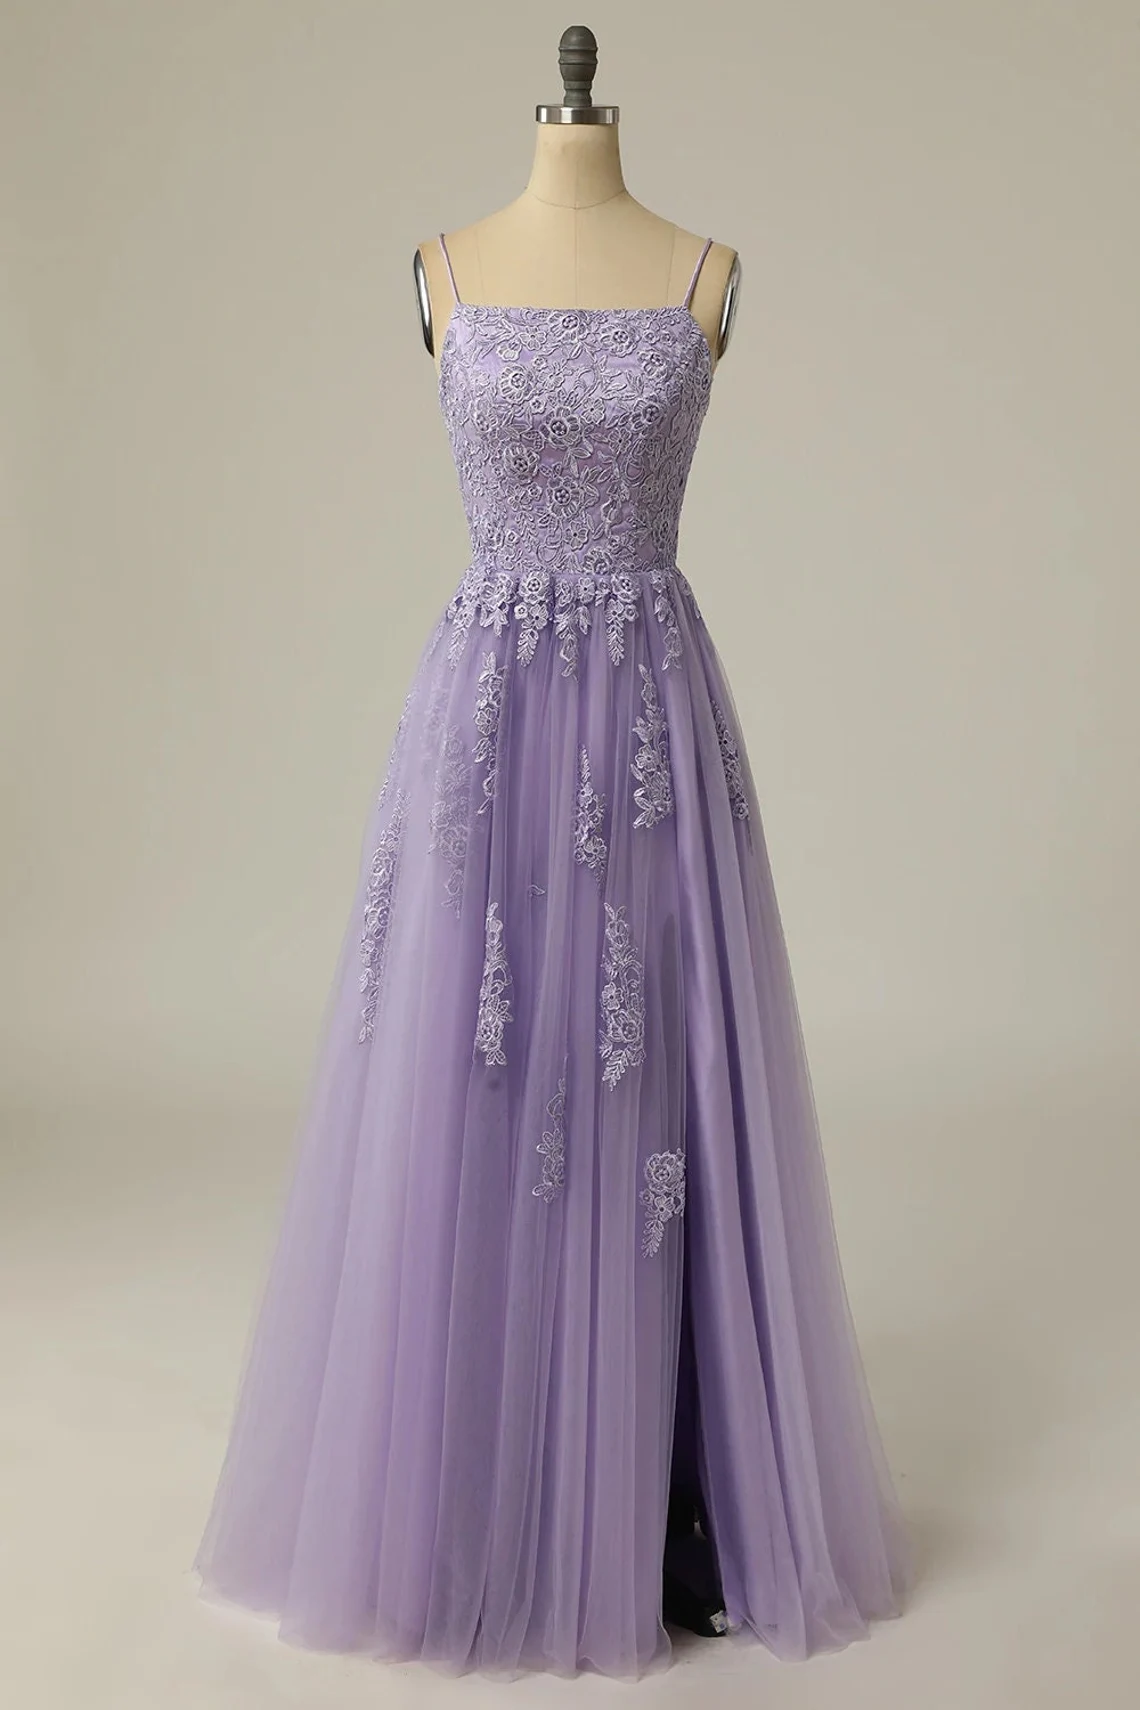 Light Purple Tulle Straps Long Party Dress With Lace, A-line Floor Length Evening Dress